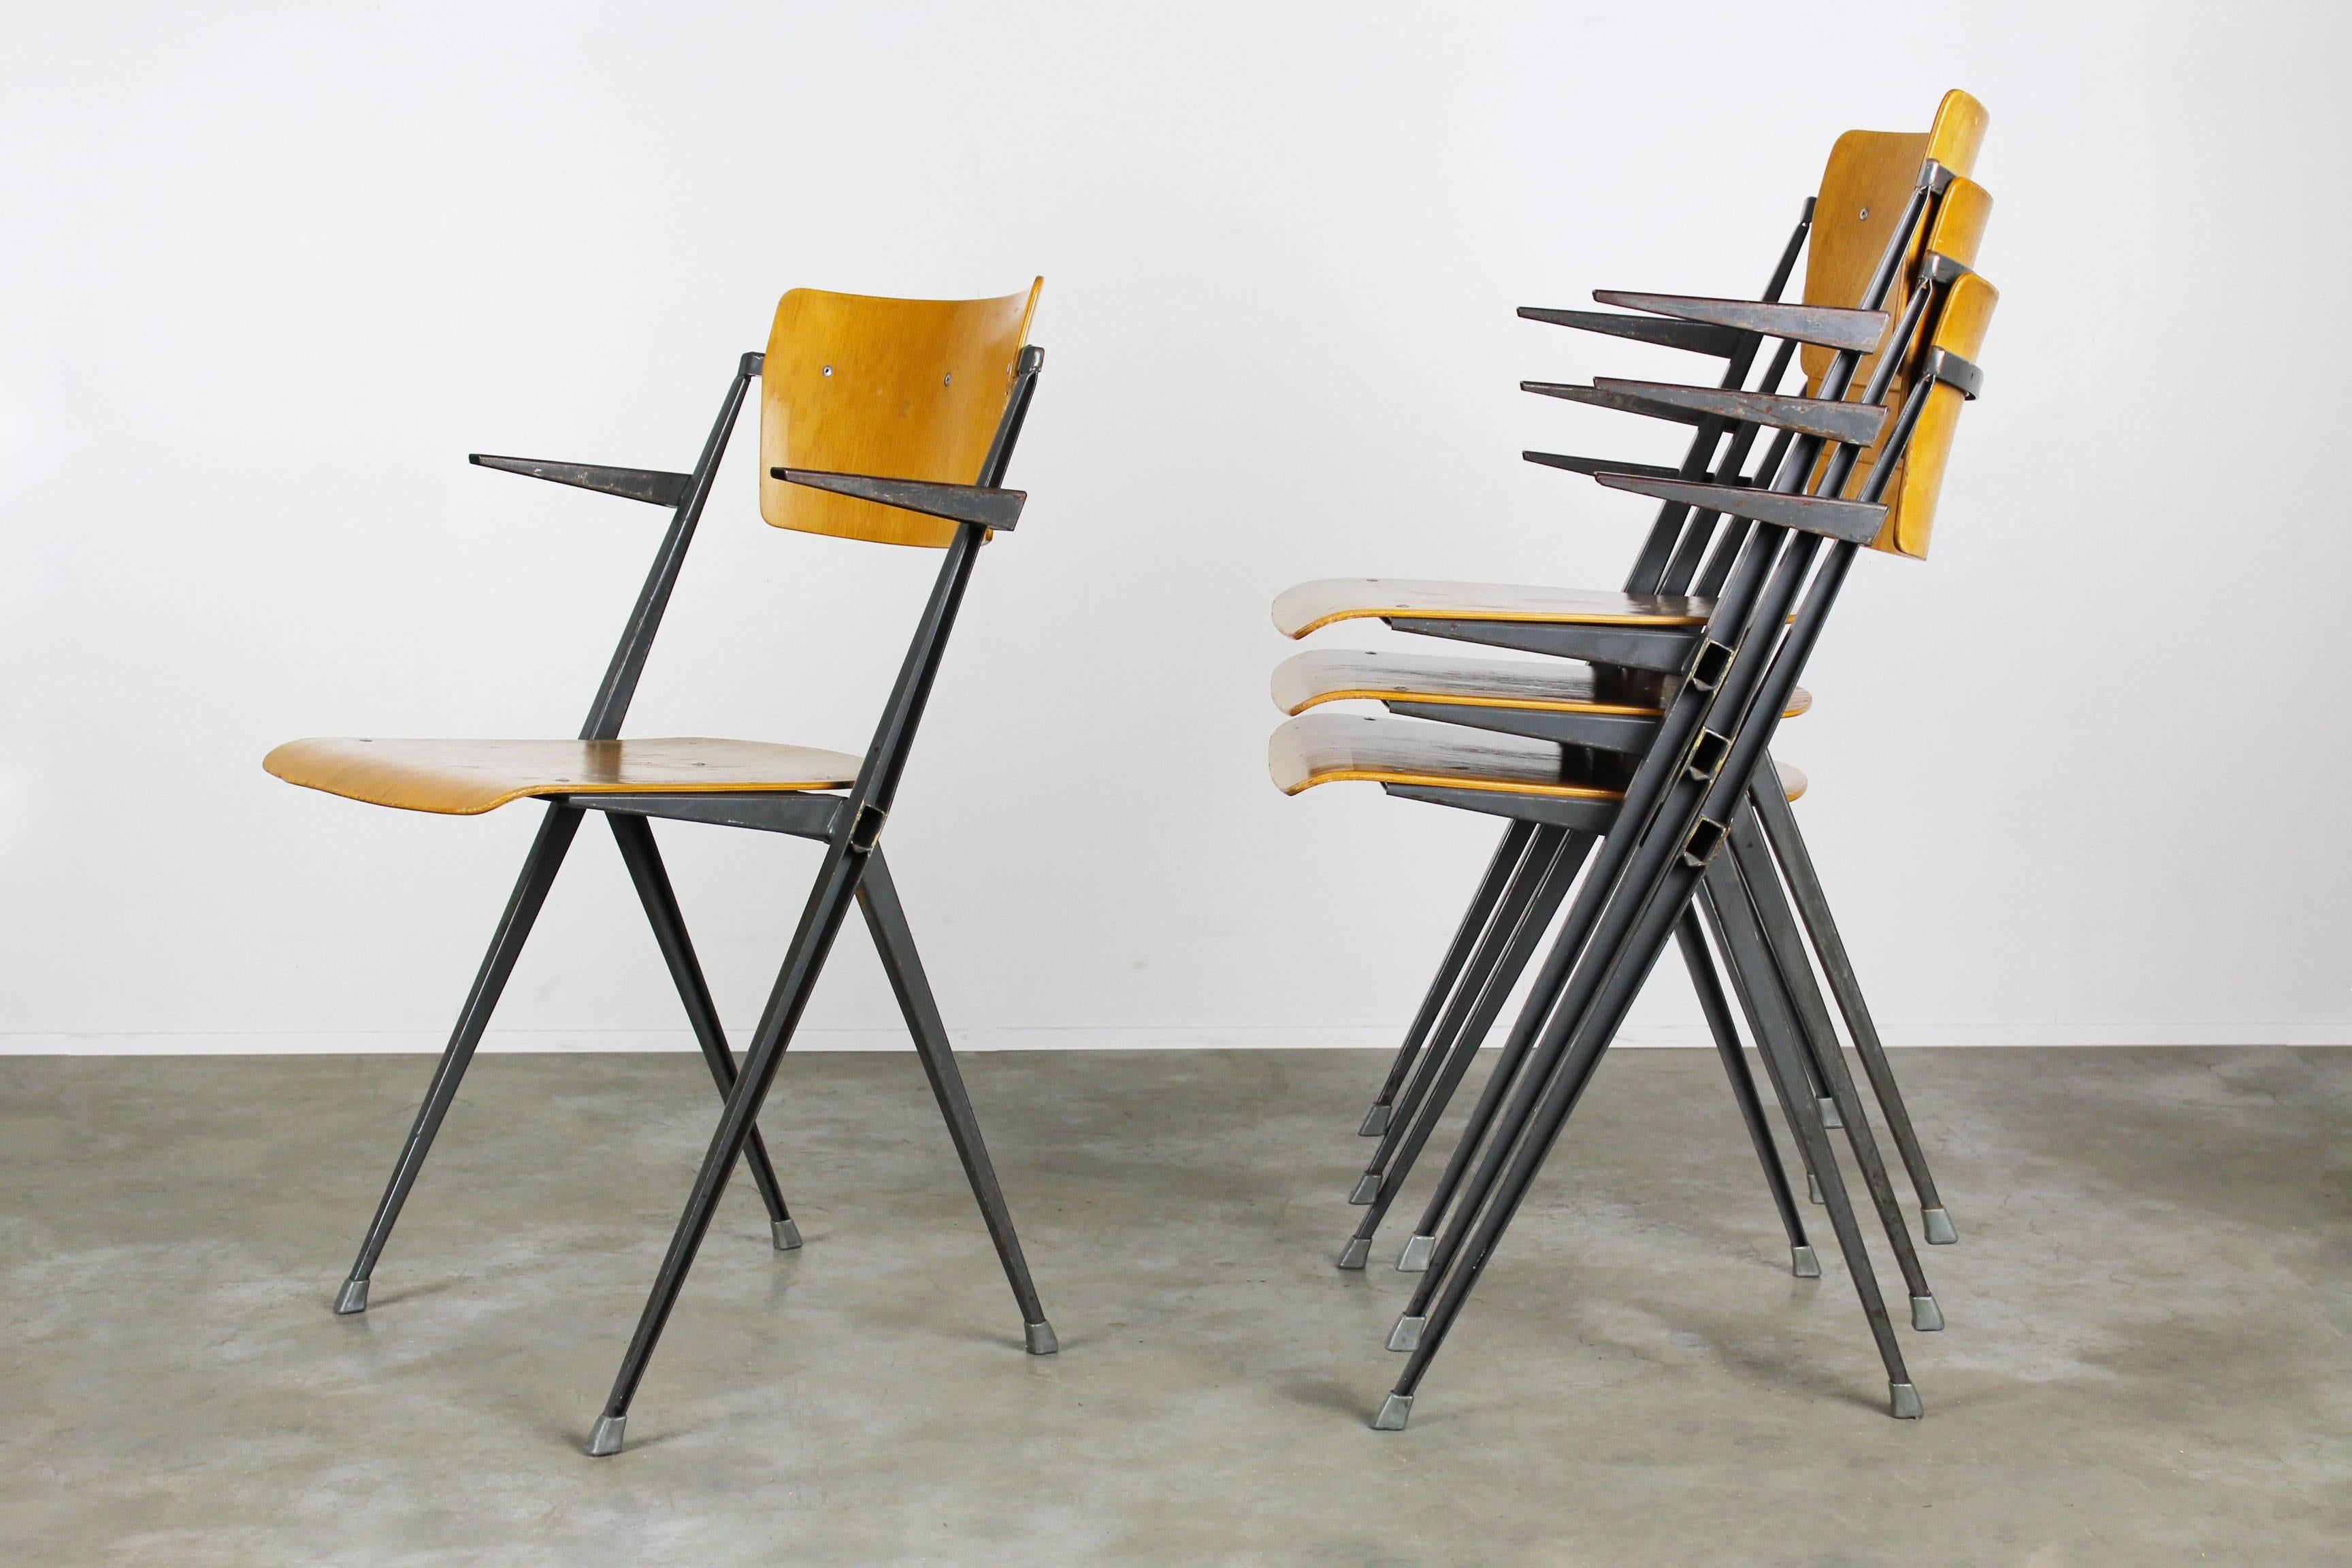 Set of four pyramid chairs with armrests designed by Dutch designer Wim Rietveld for Ahrend de Cirkel in 1963. Very difficult to find set. The chairs have a wonderful patina especially the armrests. The design of these chairs always draws your